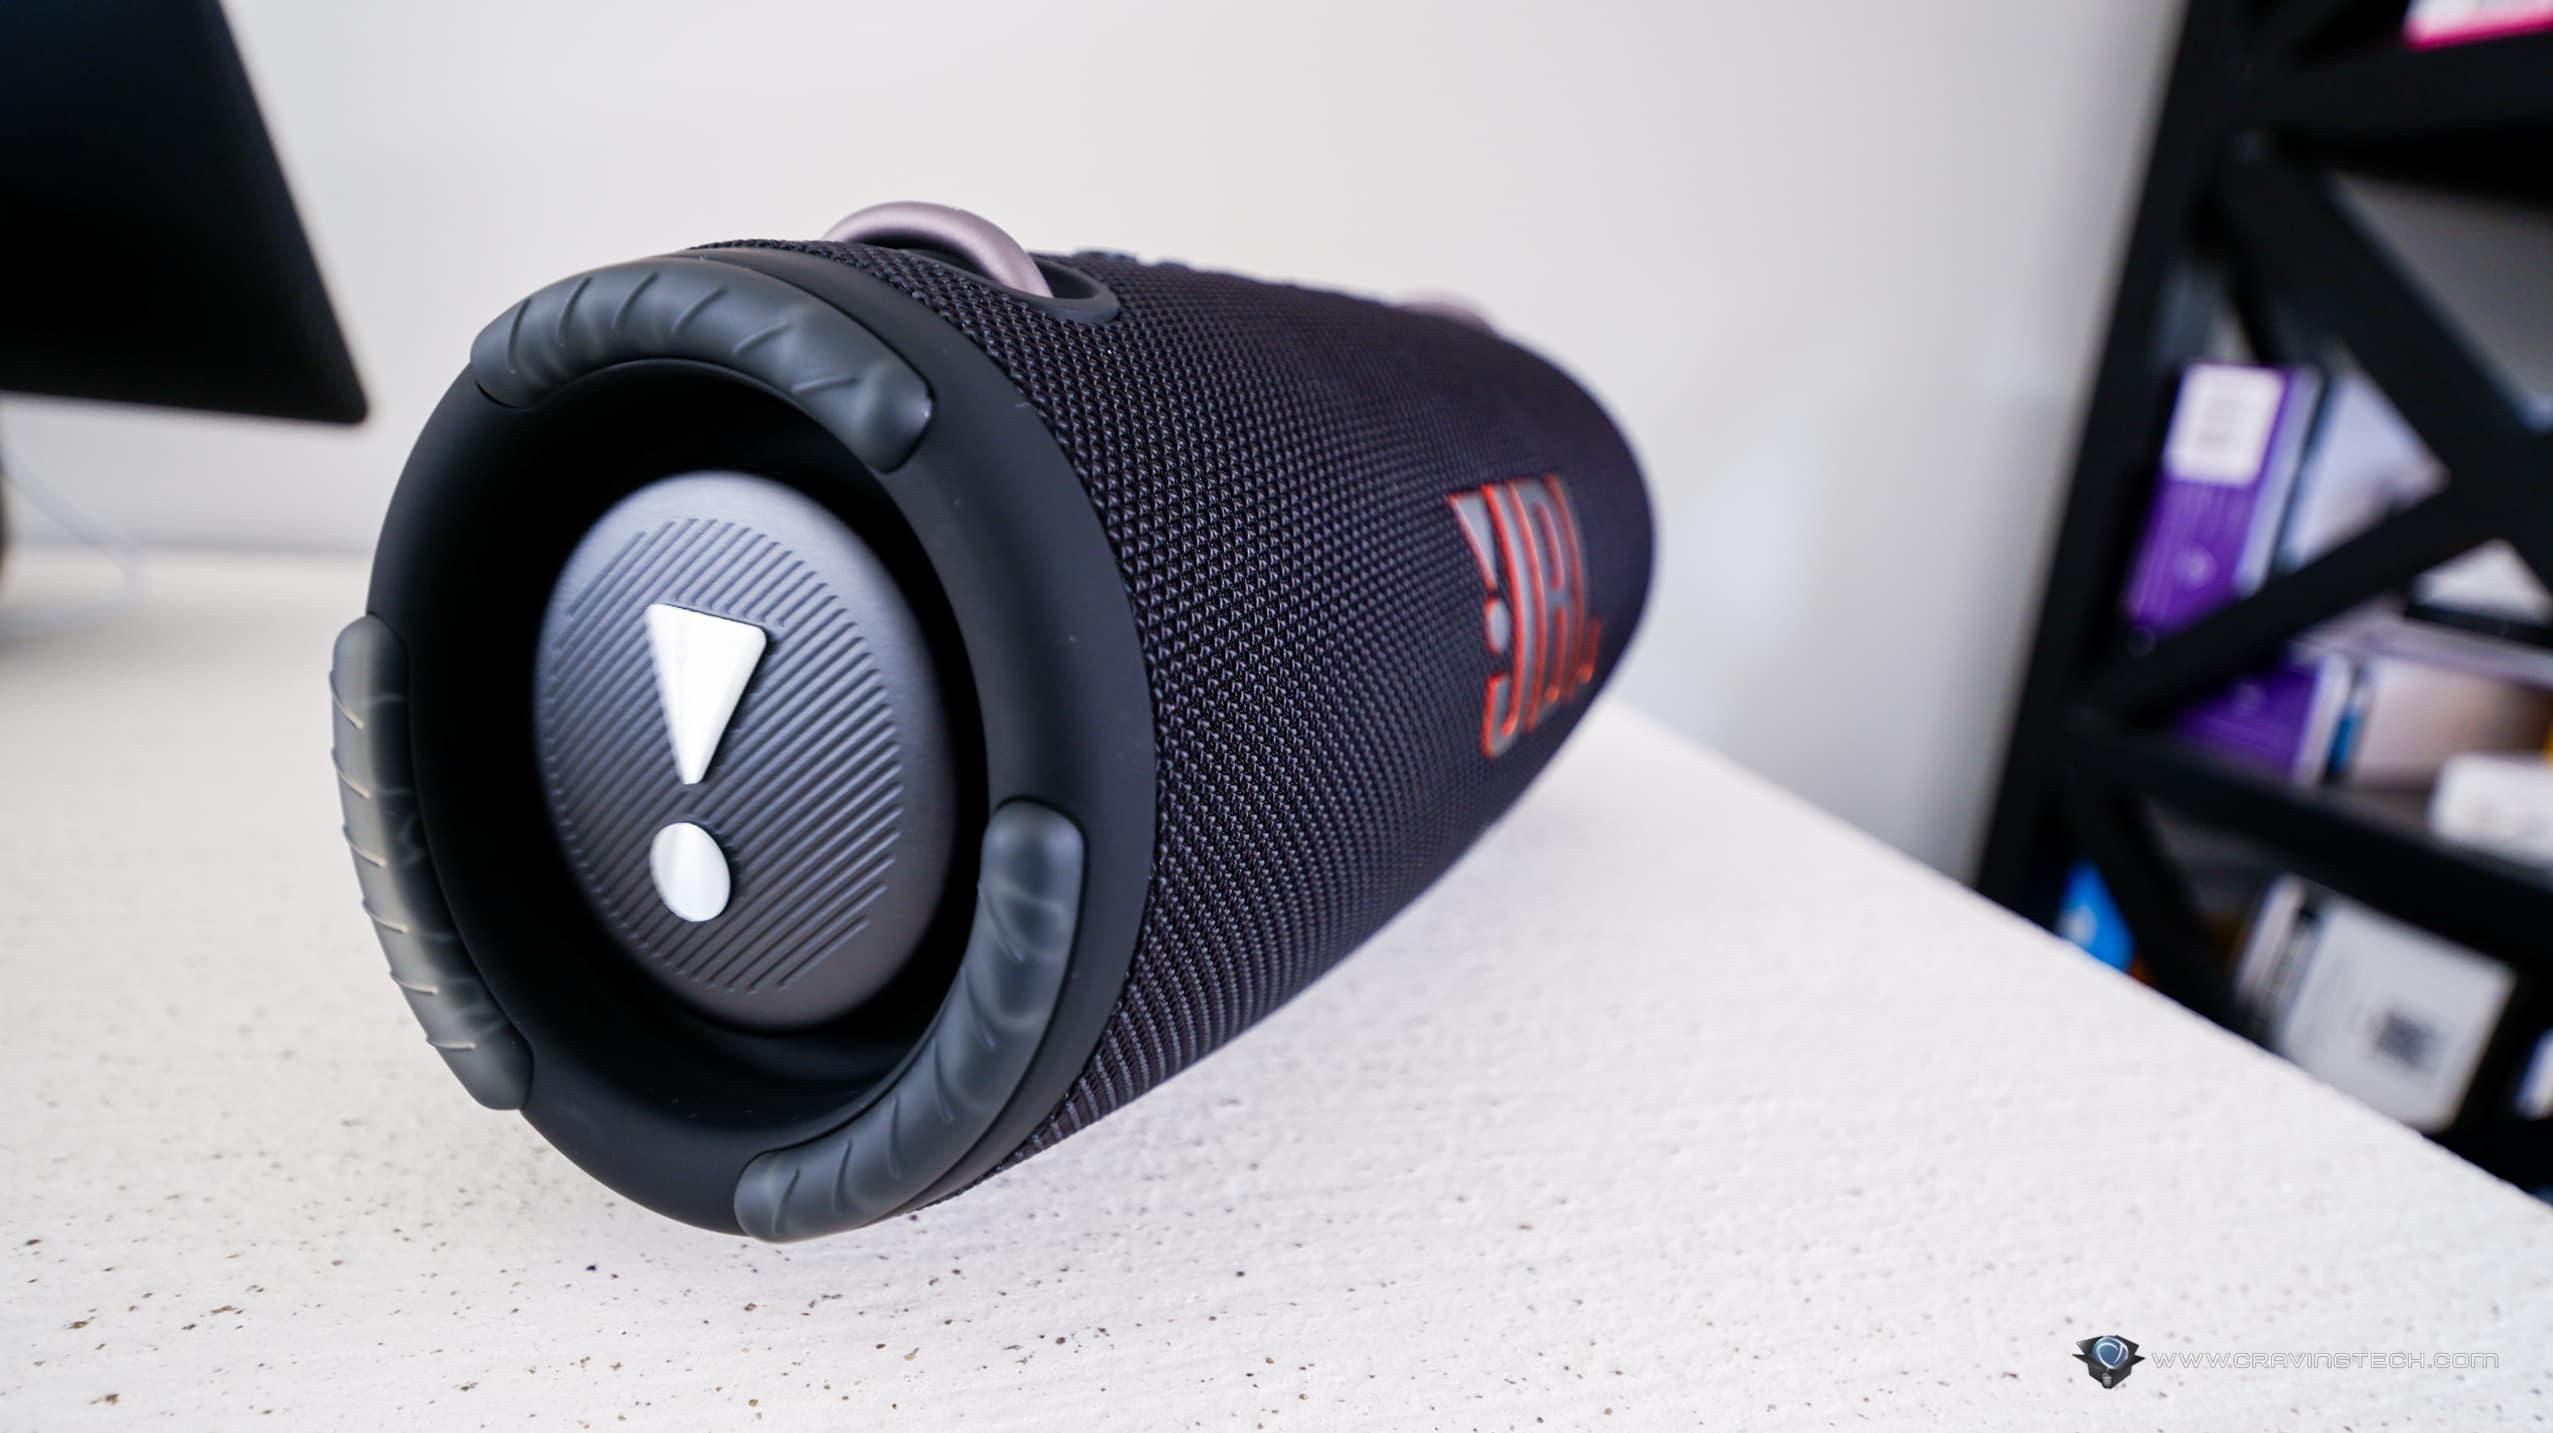 Review: JBL Xtreme 3 is a durable Bluetooth speaker great for bass lovers